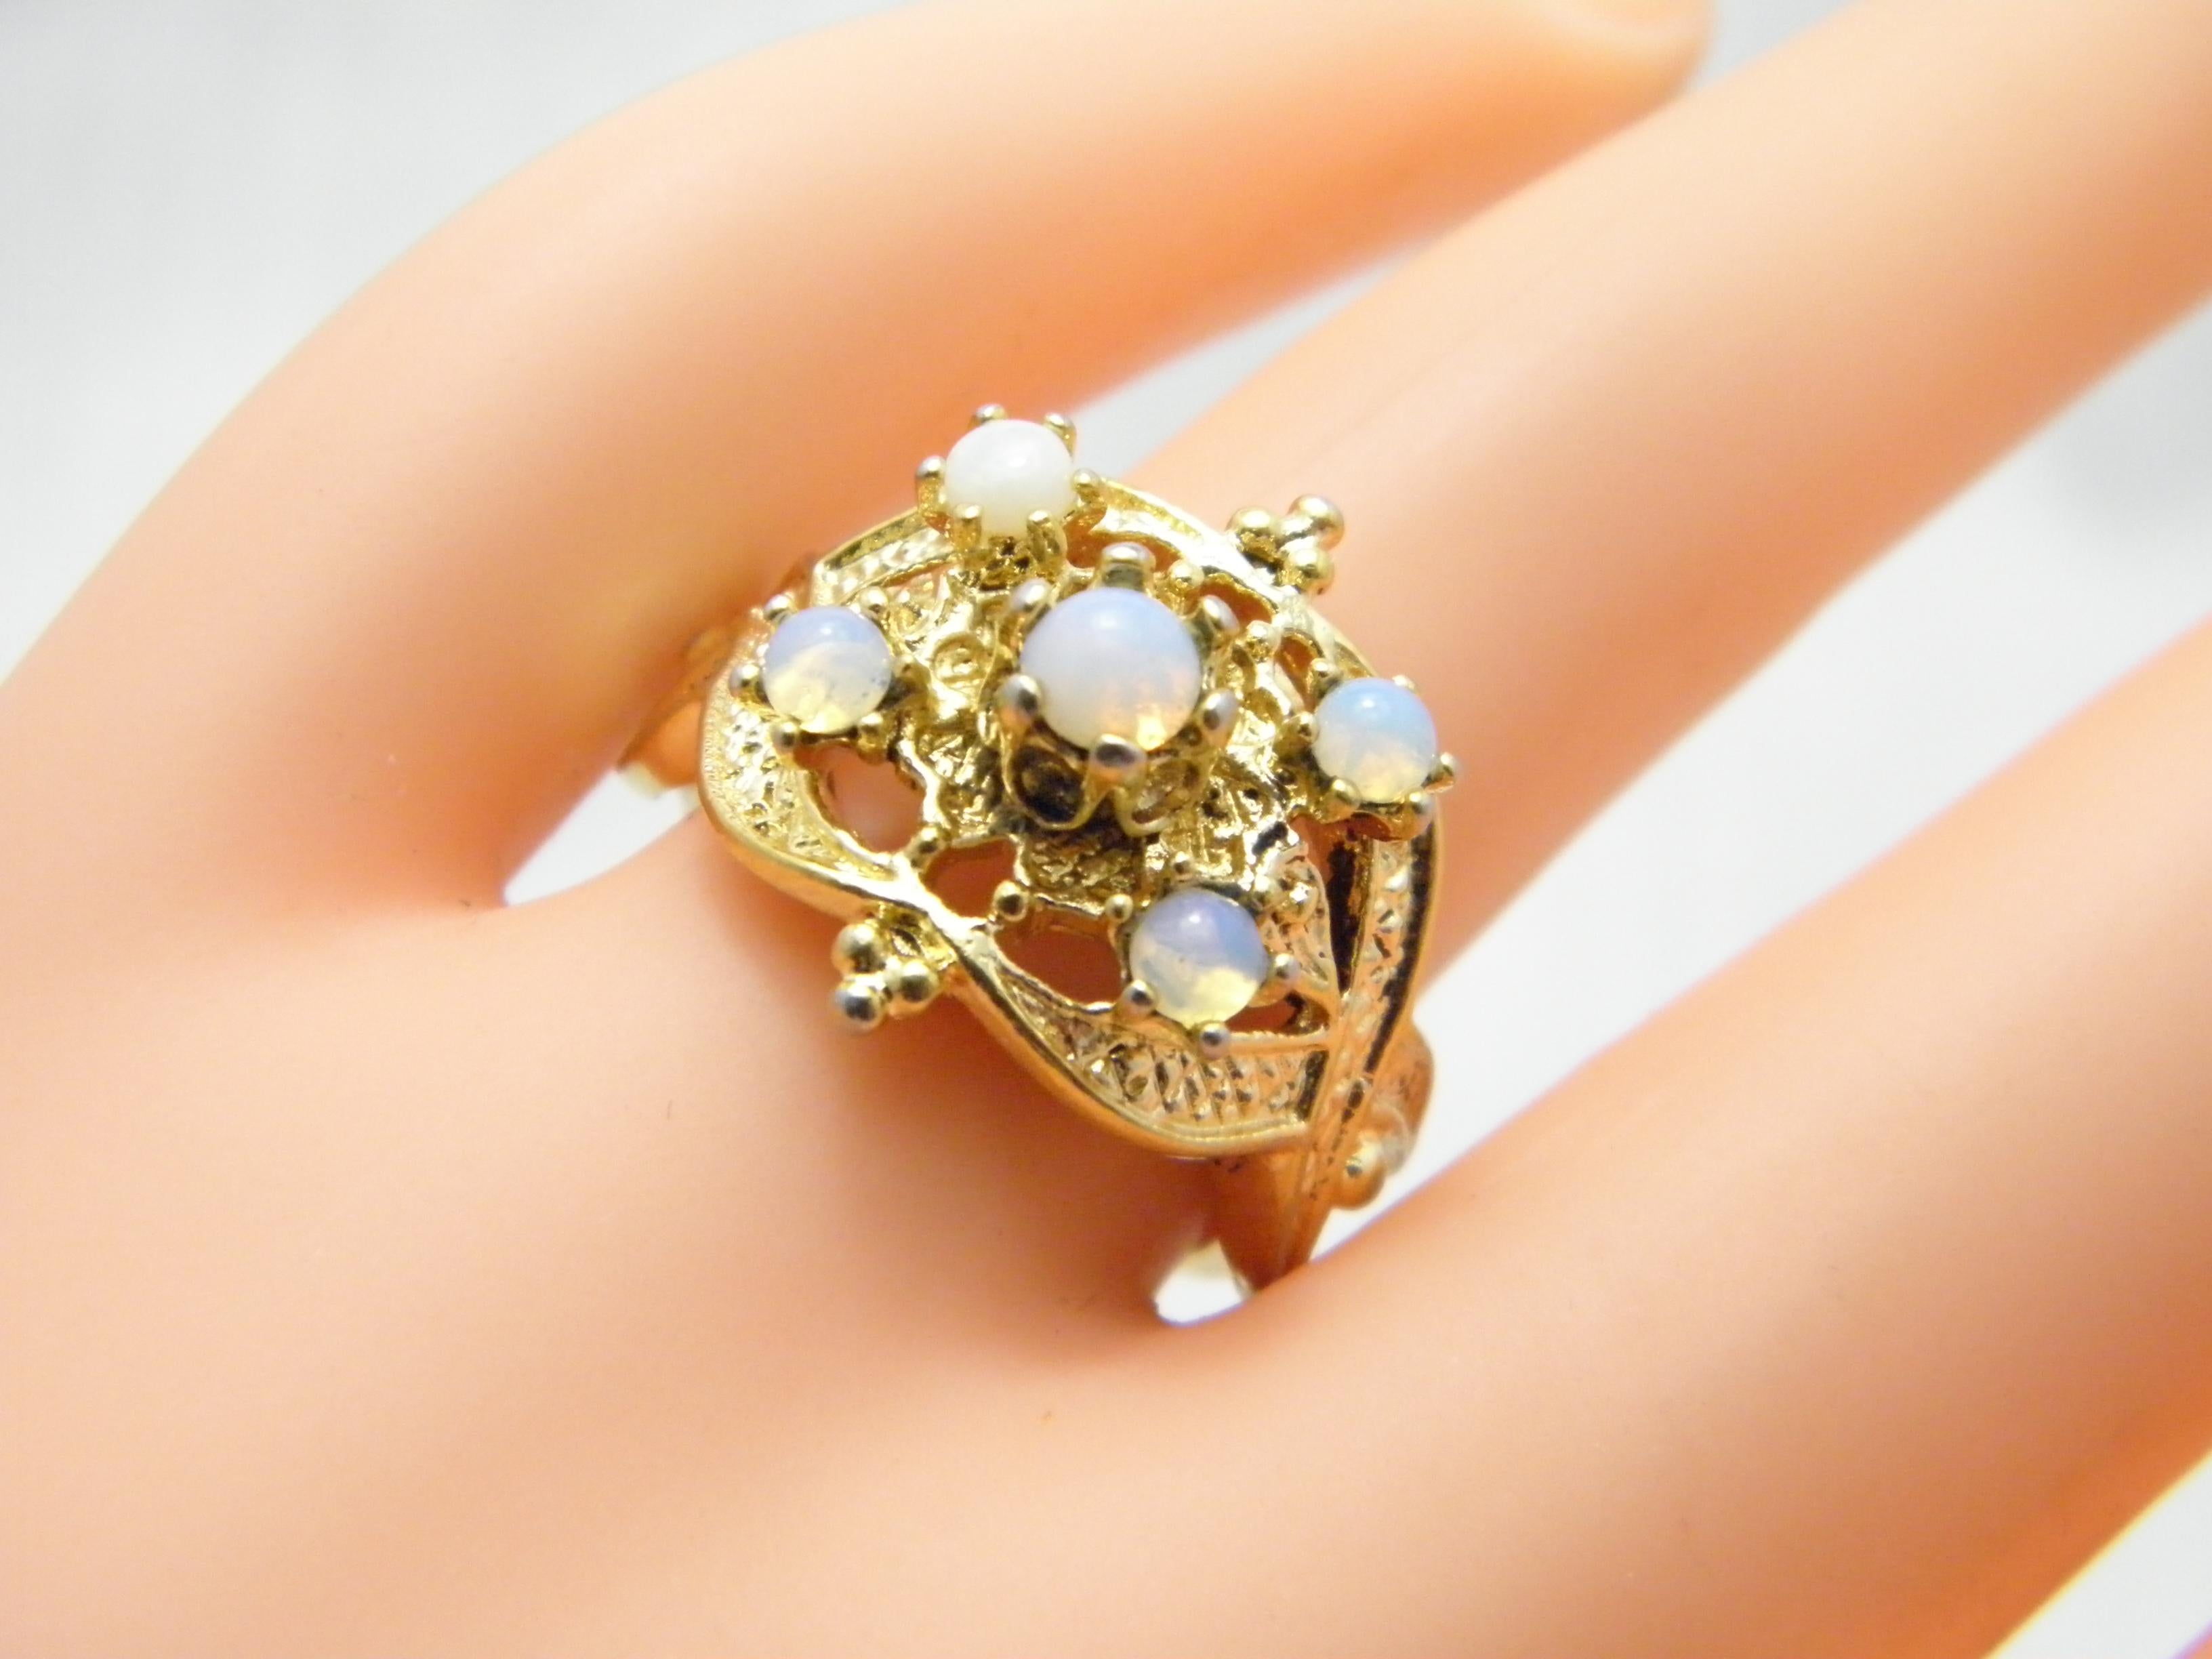 Vintage 14ct Gold Opal Signet Keeper Ring M 6.25 585 Purity Coober Pedy Heavy For Sale 2